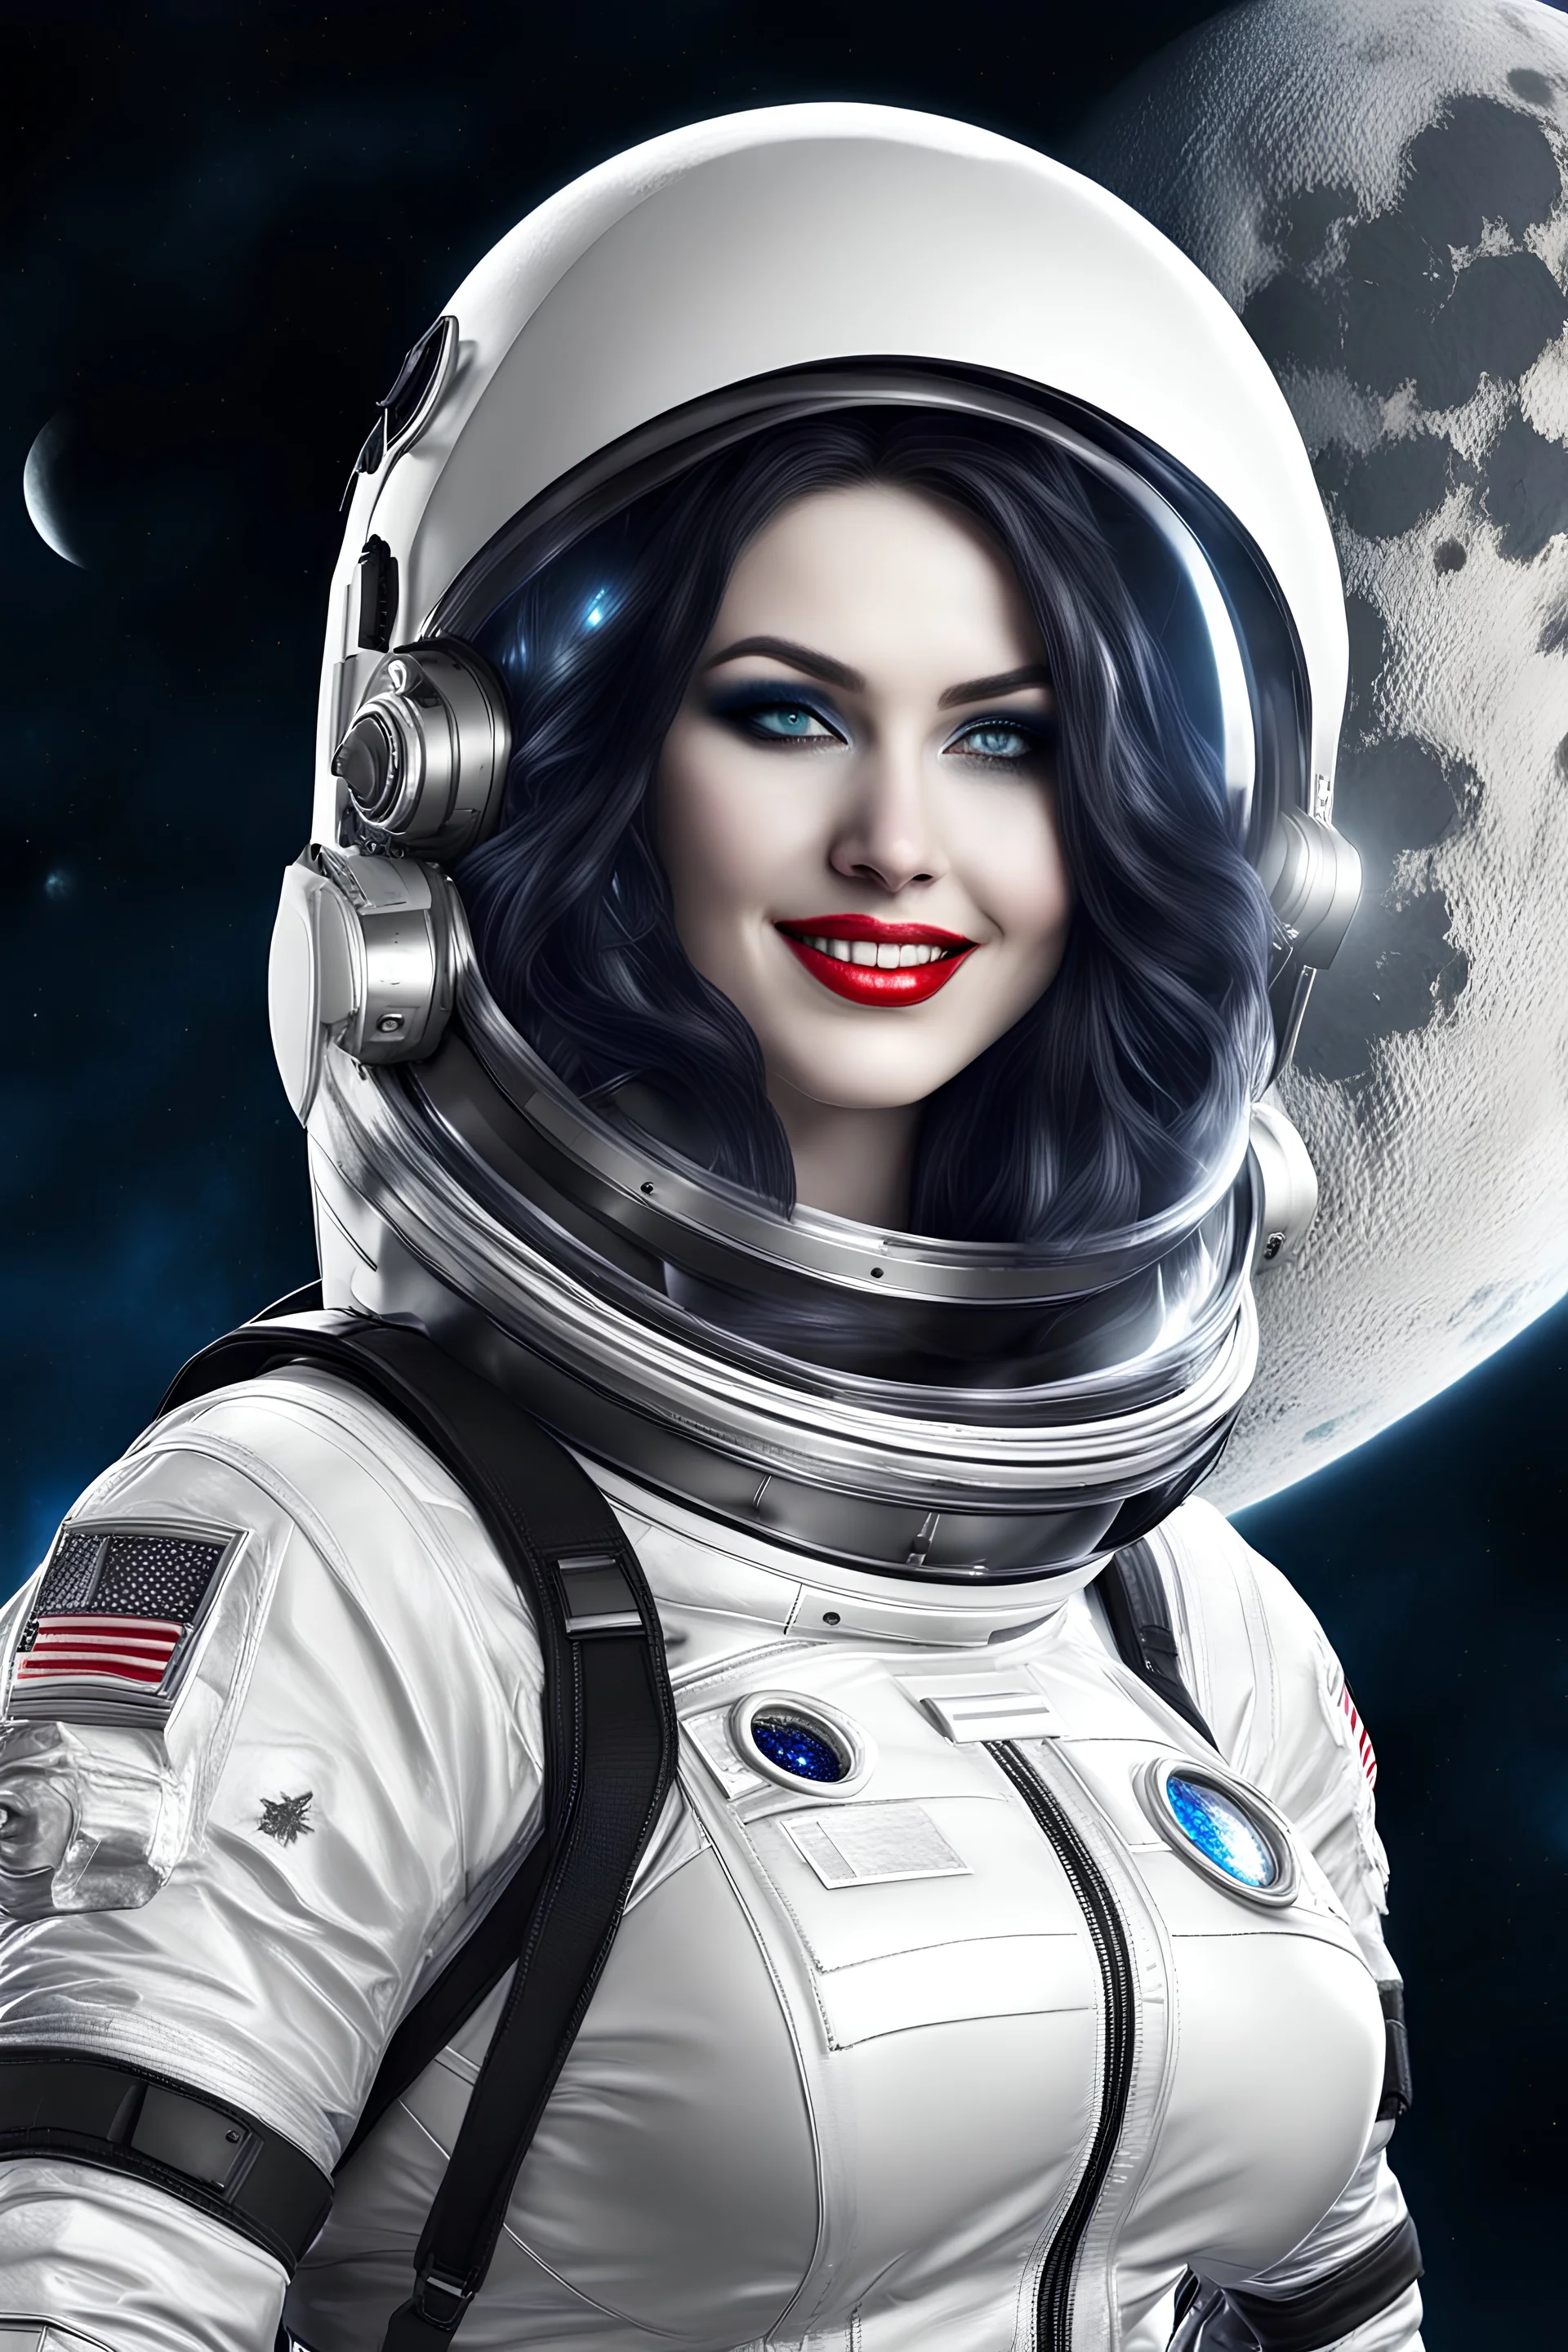 sweet pretty woman, good body, big bubs, good blue eyes, long black and white haired, front angle, wearing a futuristic astronaut costume, smile, intense look, nerd style, tatoo woman, piercings, red make-up, scratched make-up, she is stay on moon, view the earth behind, intrincate details, high definition picture, render, master piece, night sky background, no deformed body, no extra arms, no extra feets, no extra fingers.